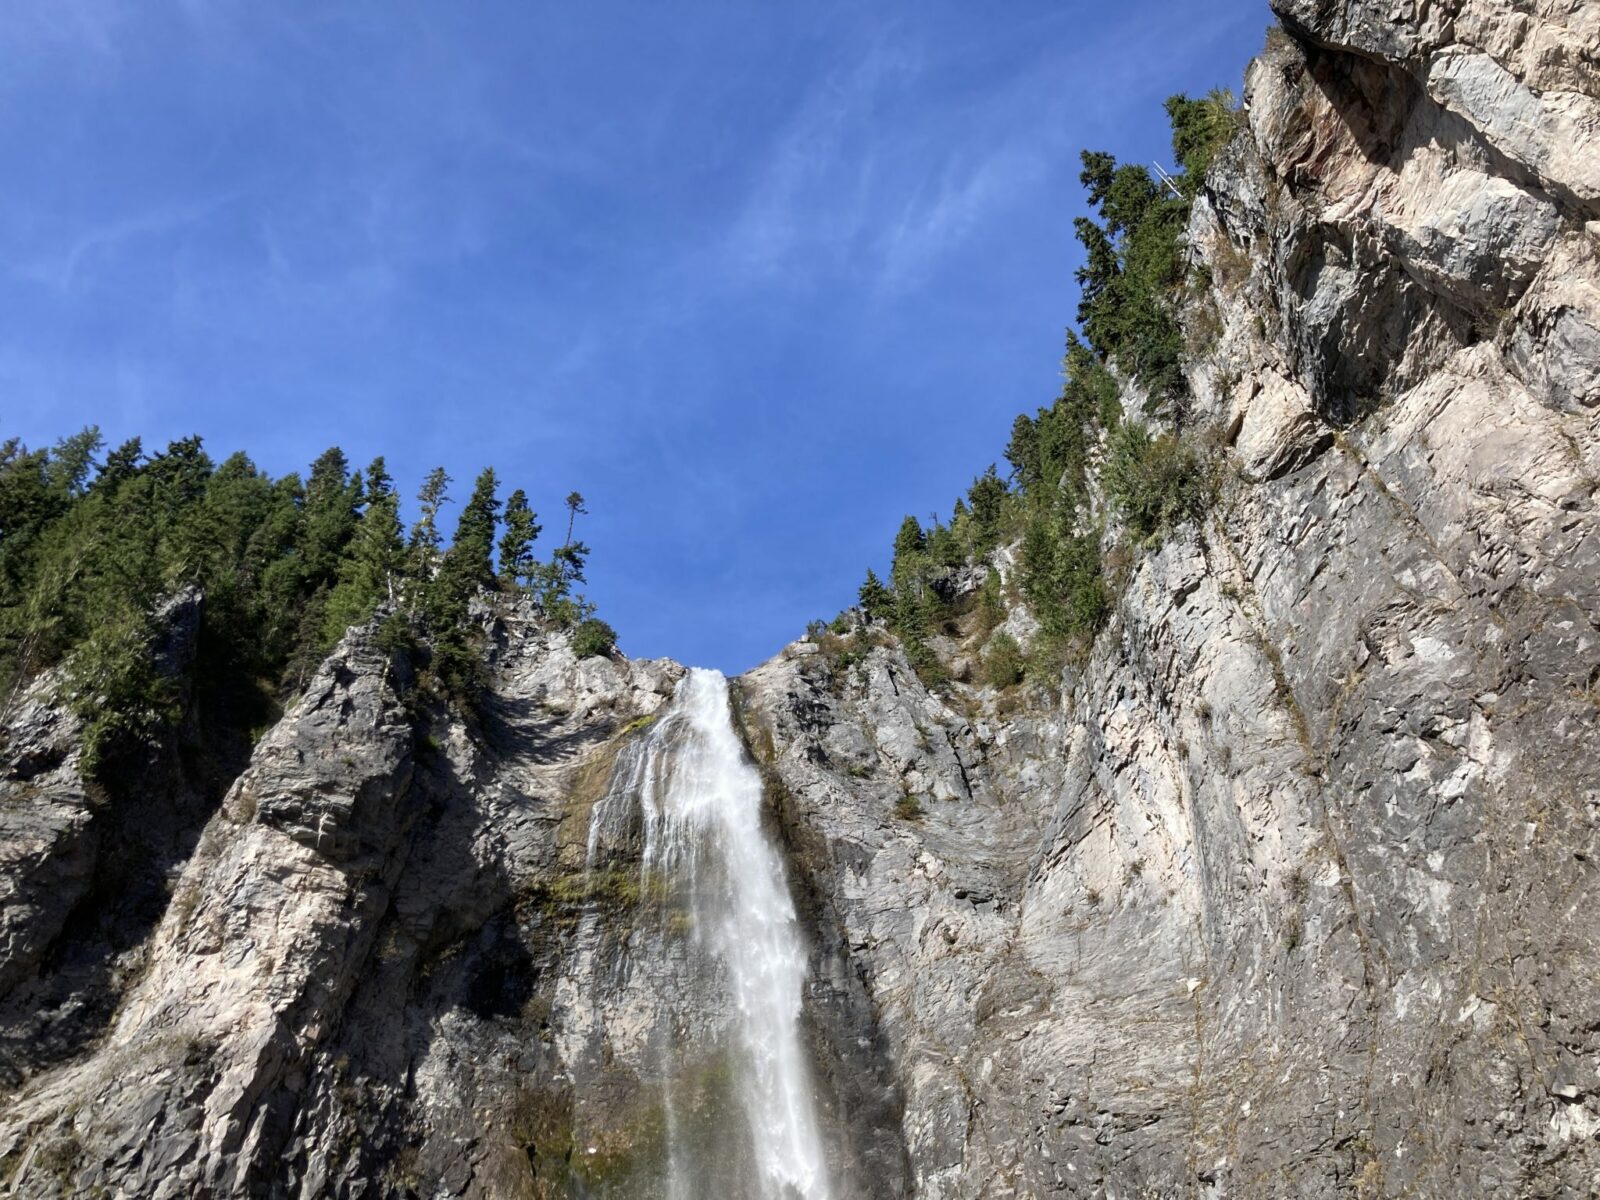 Looking up at a high waterfall coming over a cliff face. There are evergreen trees lining the top of the cliff and the sky is blue